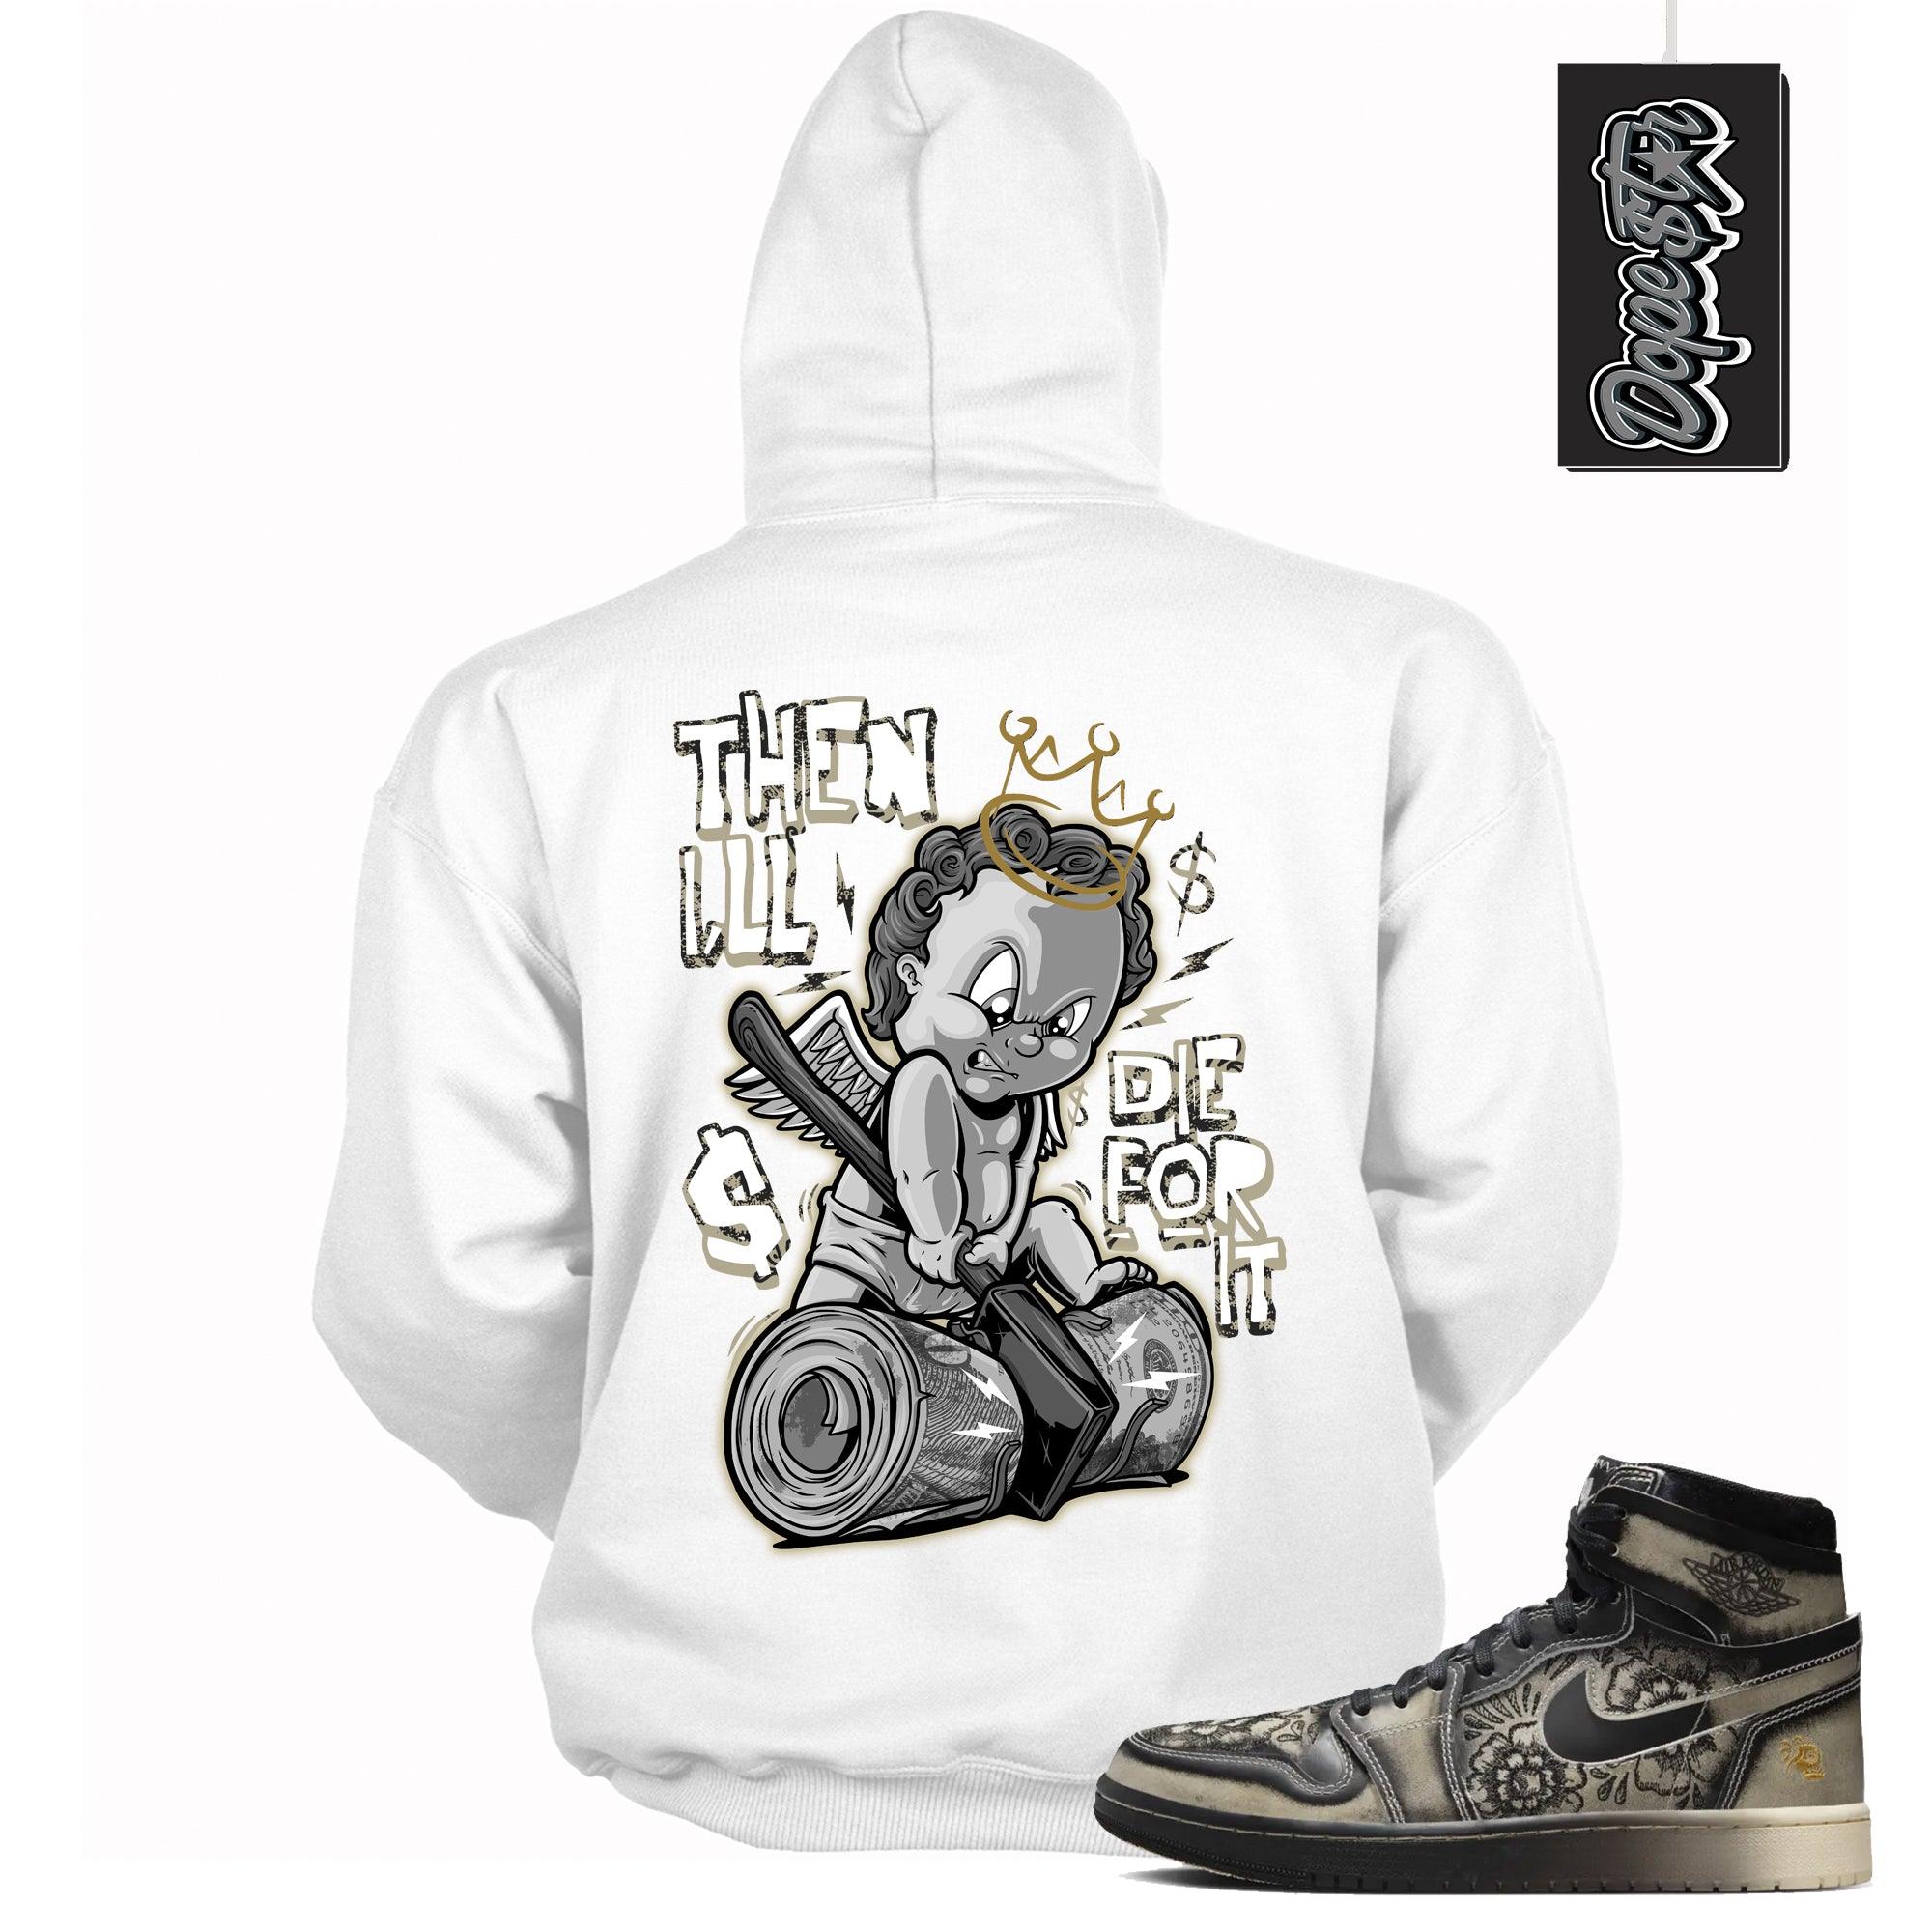 Cool White Graphic Hoodie with “ Then I’ll 2 “ print, that perfectly matches Air Jordan 1 High Zoom Comfort 2 Dia de Muertos Black and Pale Ivory sneakers 